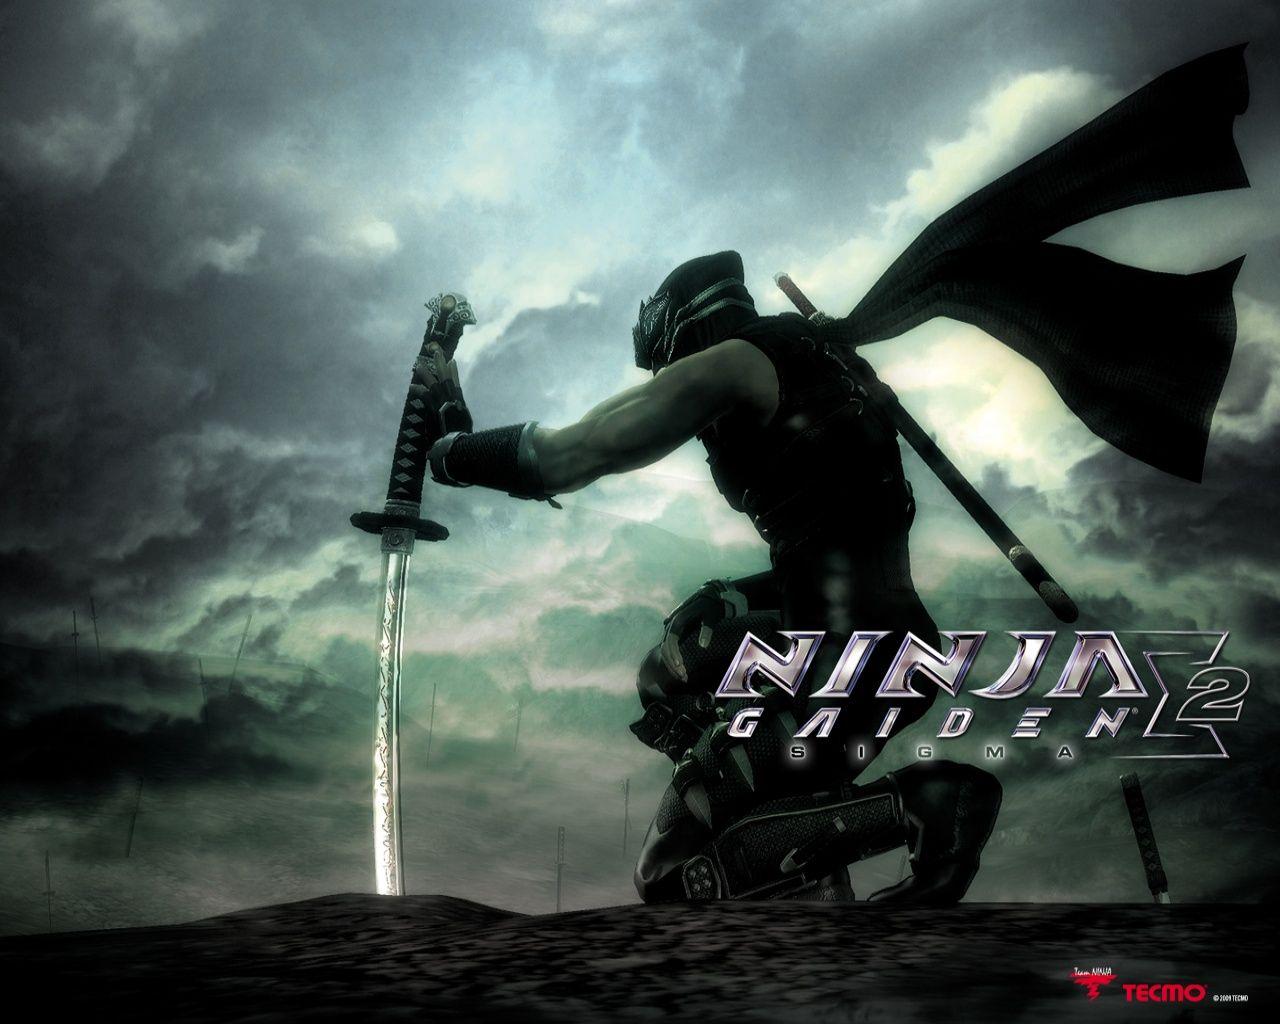 Harder than a compressed pile of Carbon. Ninja Gaiden!!